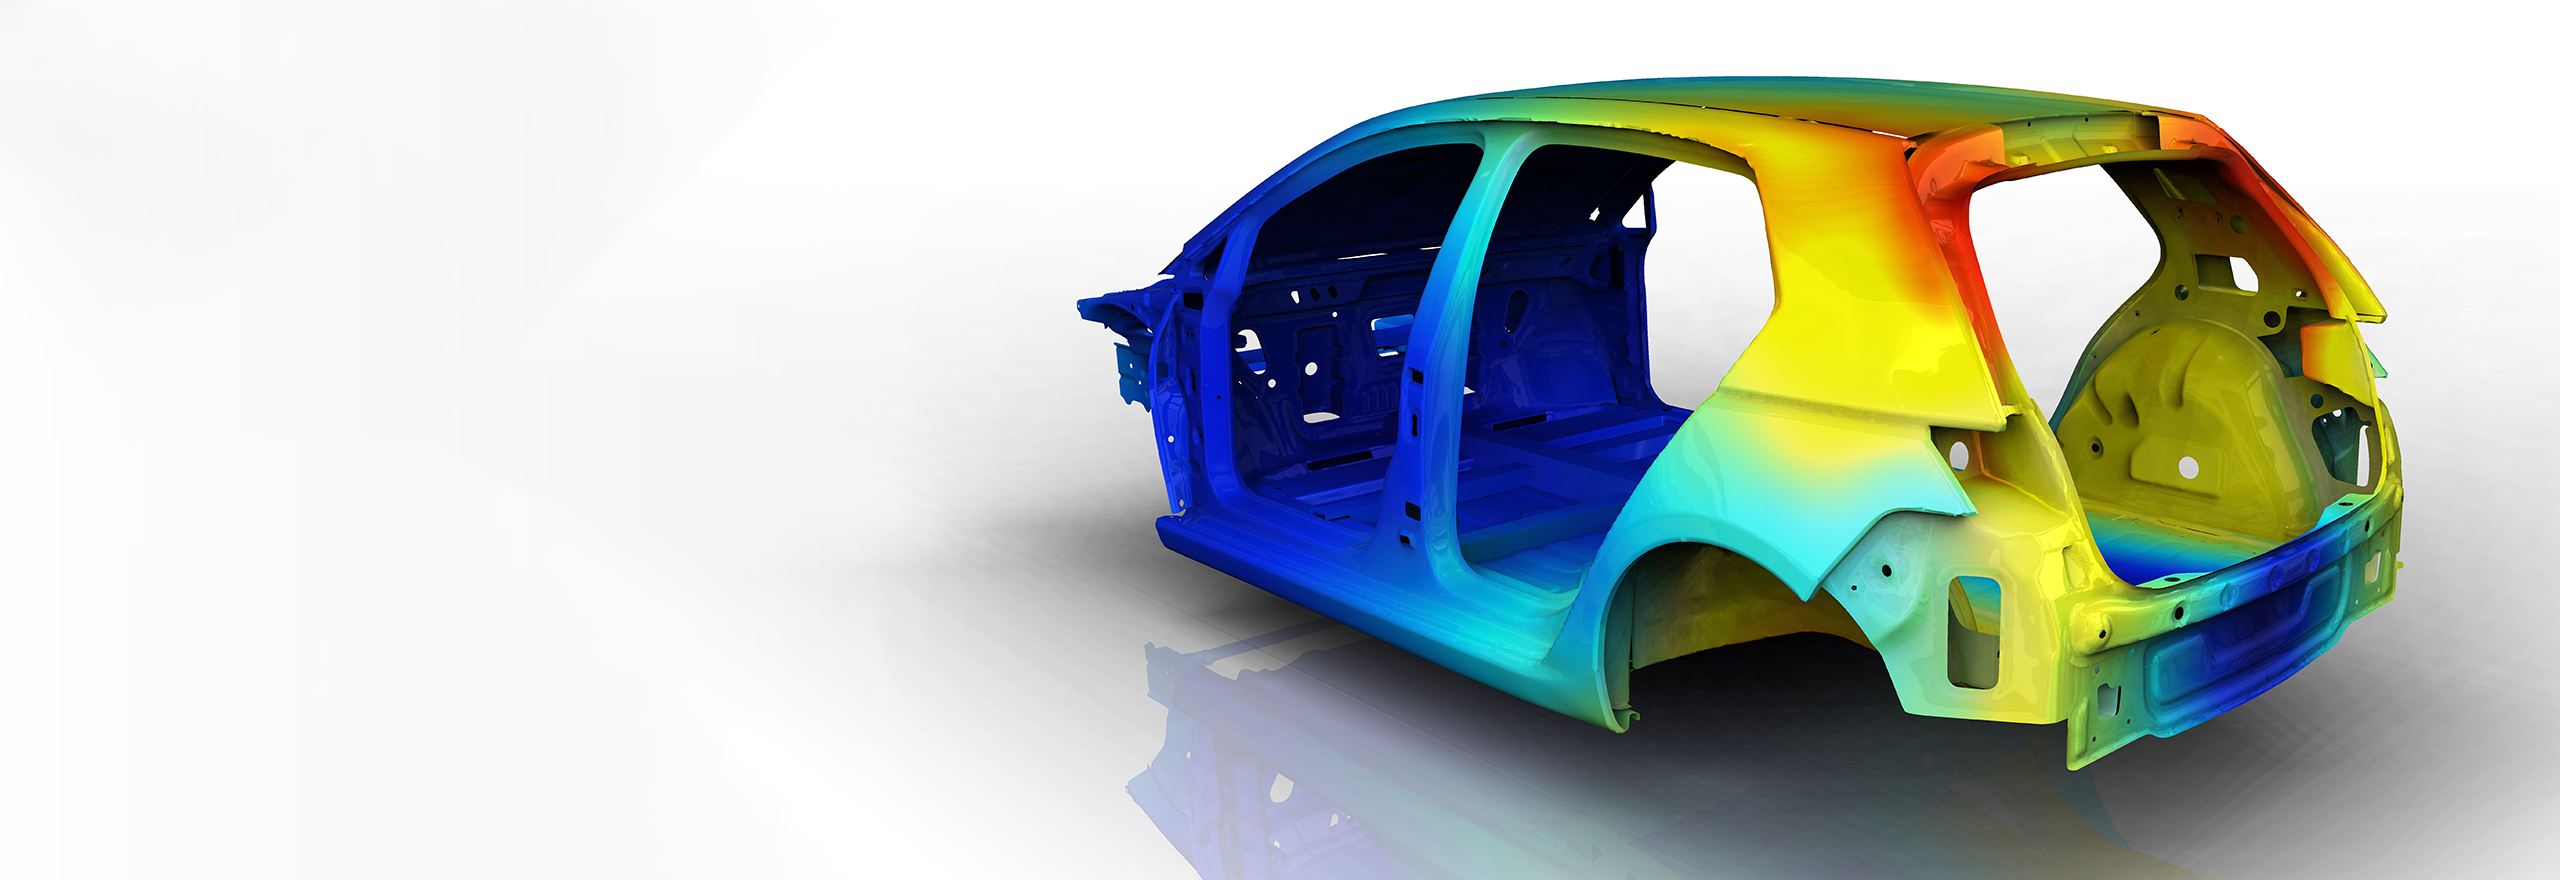 A simulation of a car shell in various multicoloured hues 